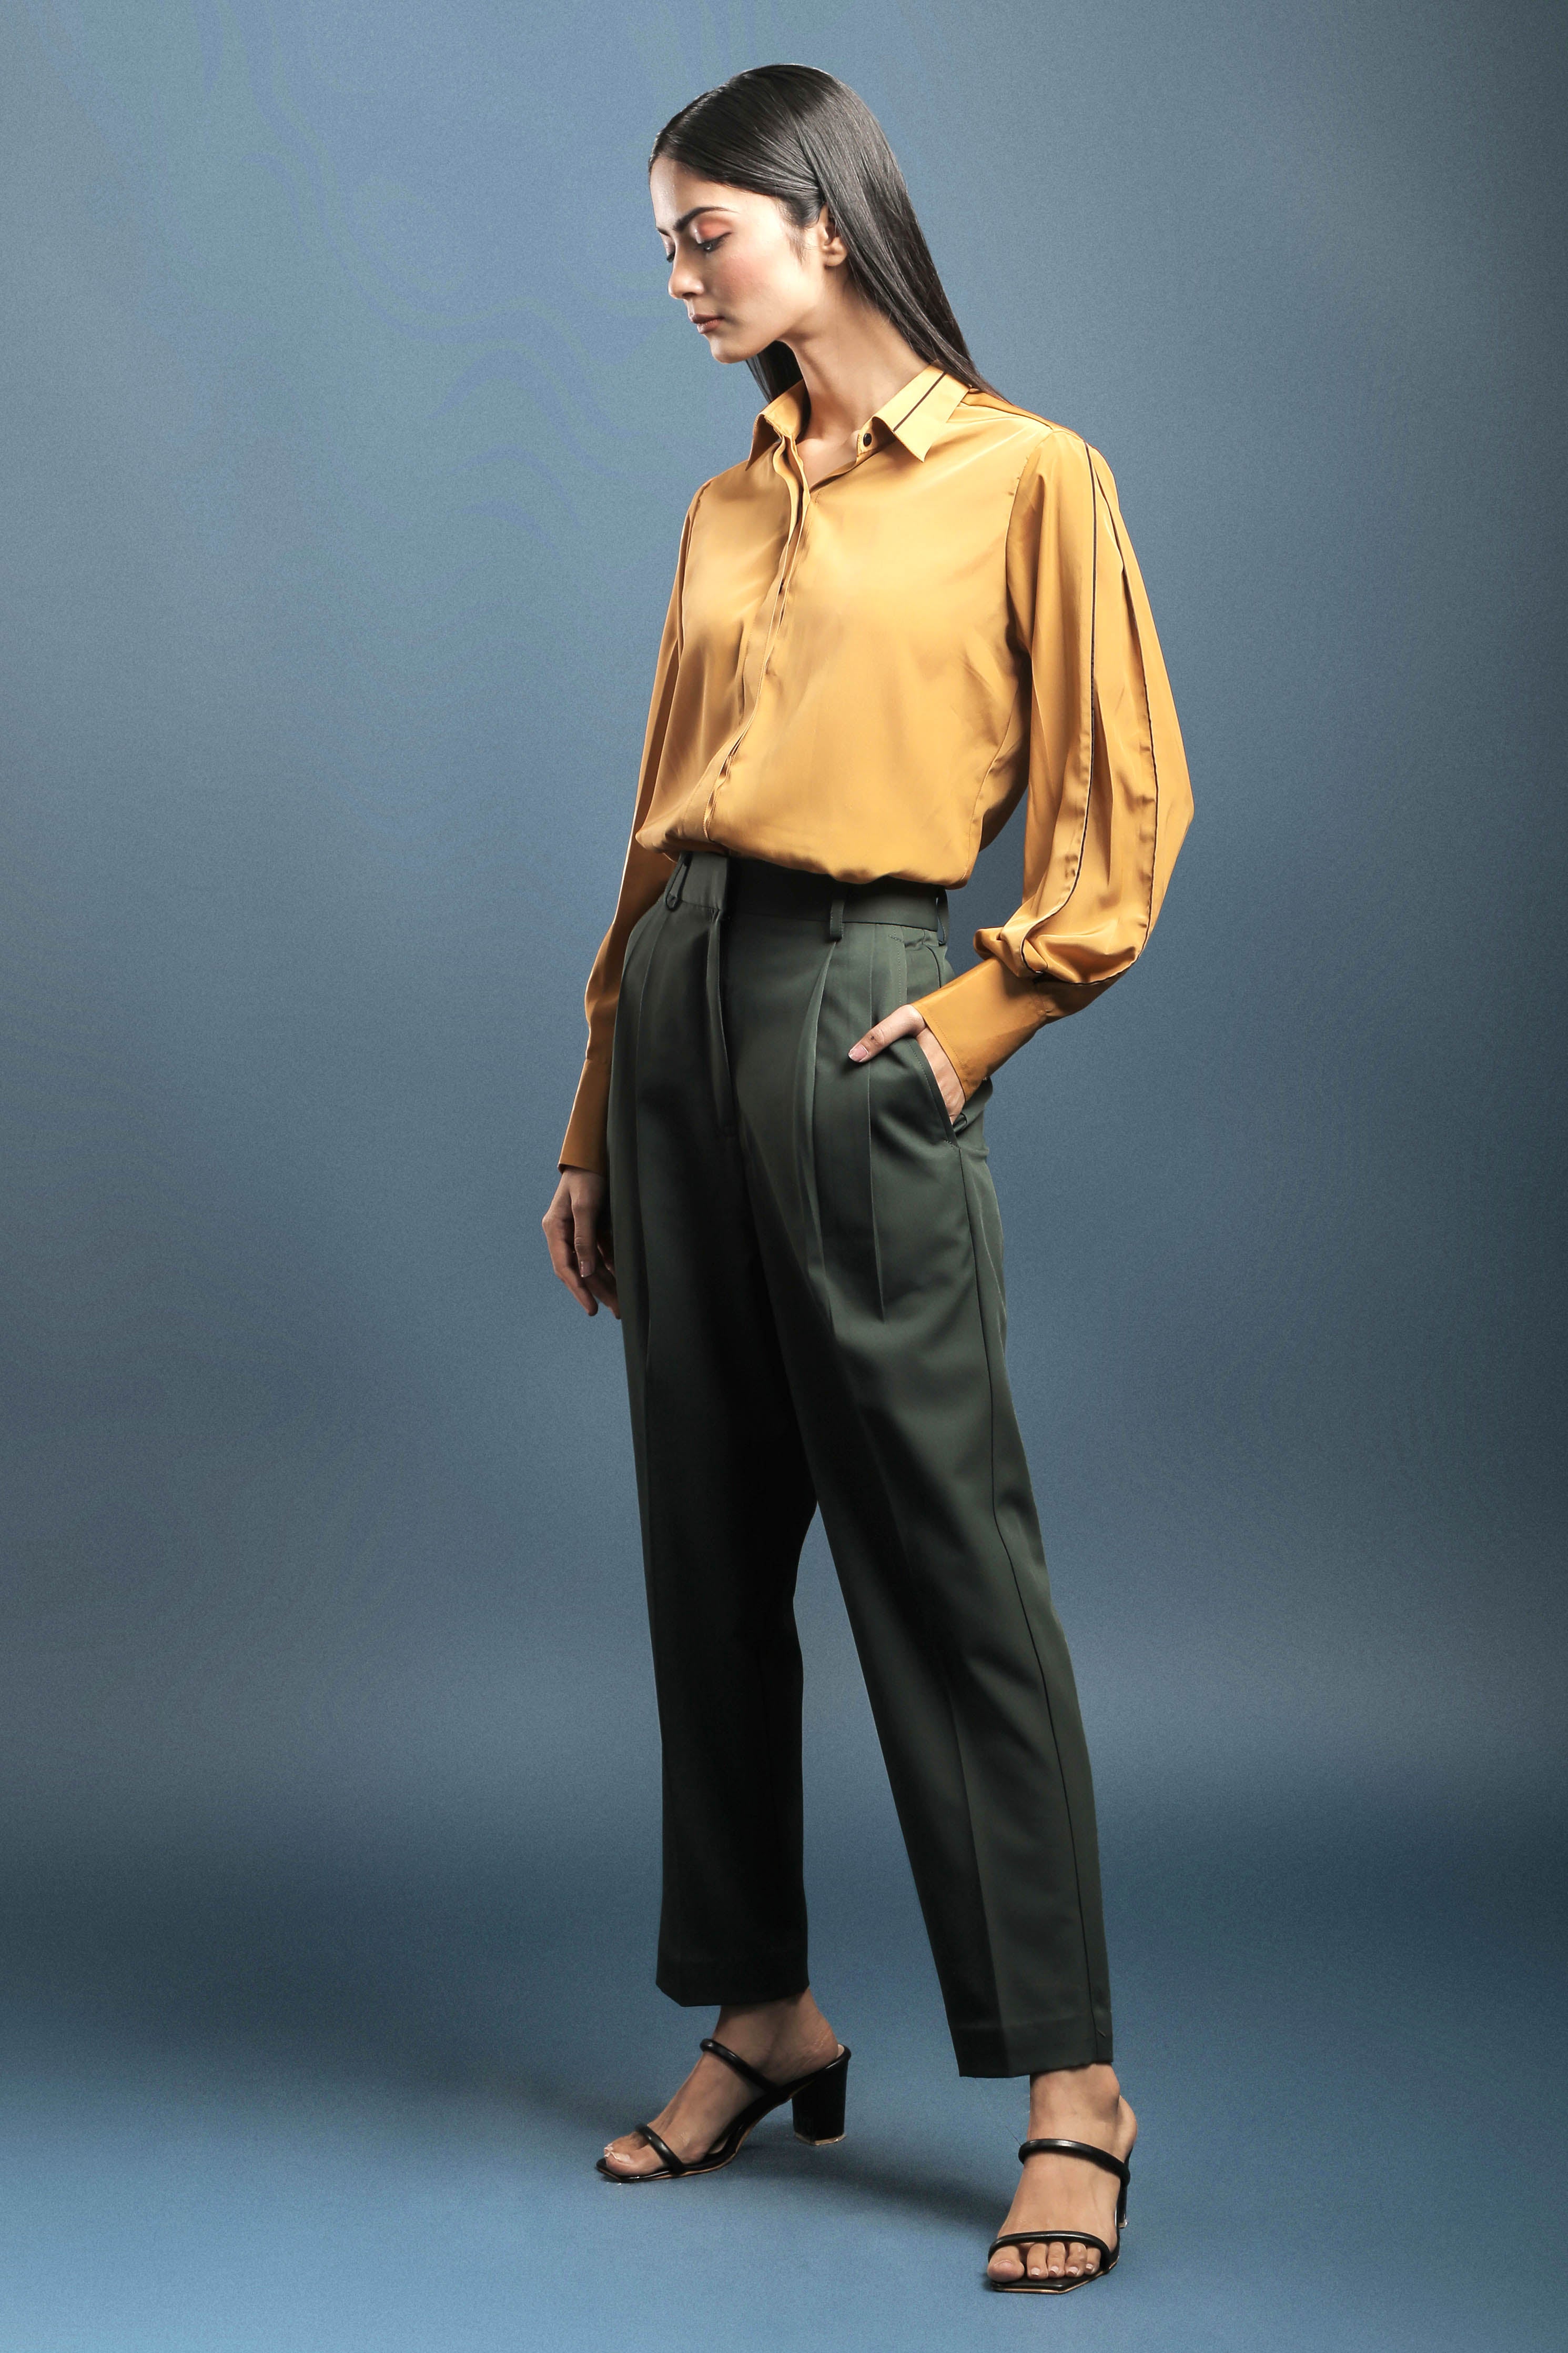 Premium Photo | A woman in a yellow shirt and brown pants sitting on a stool